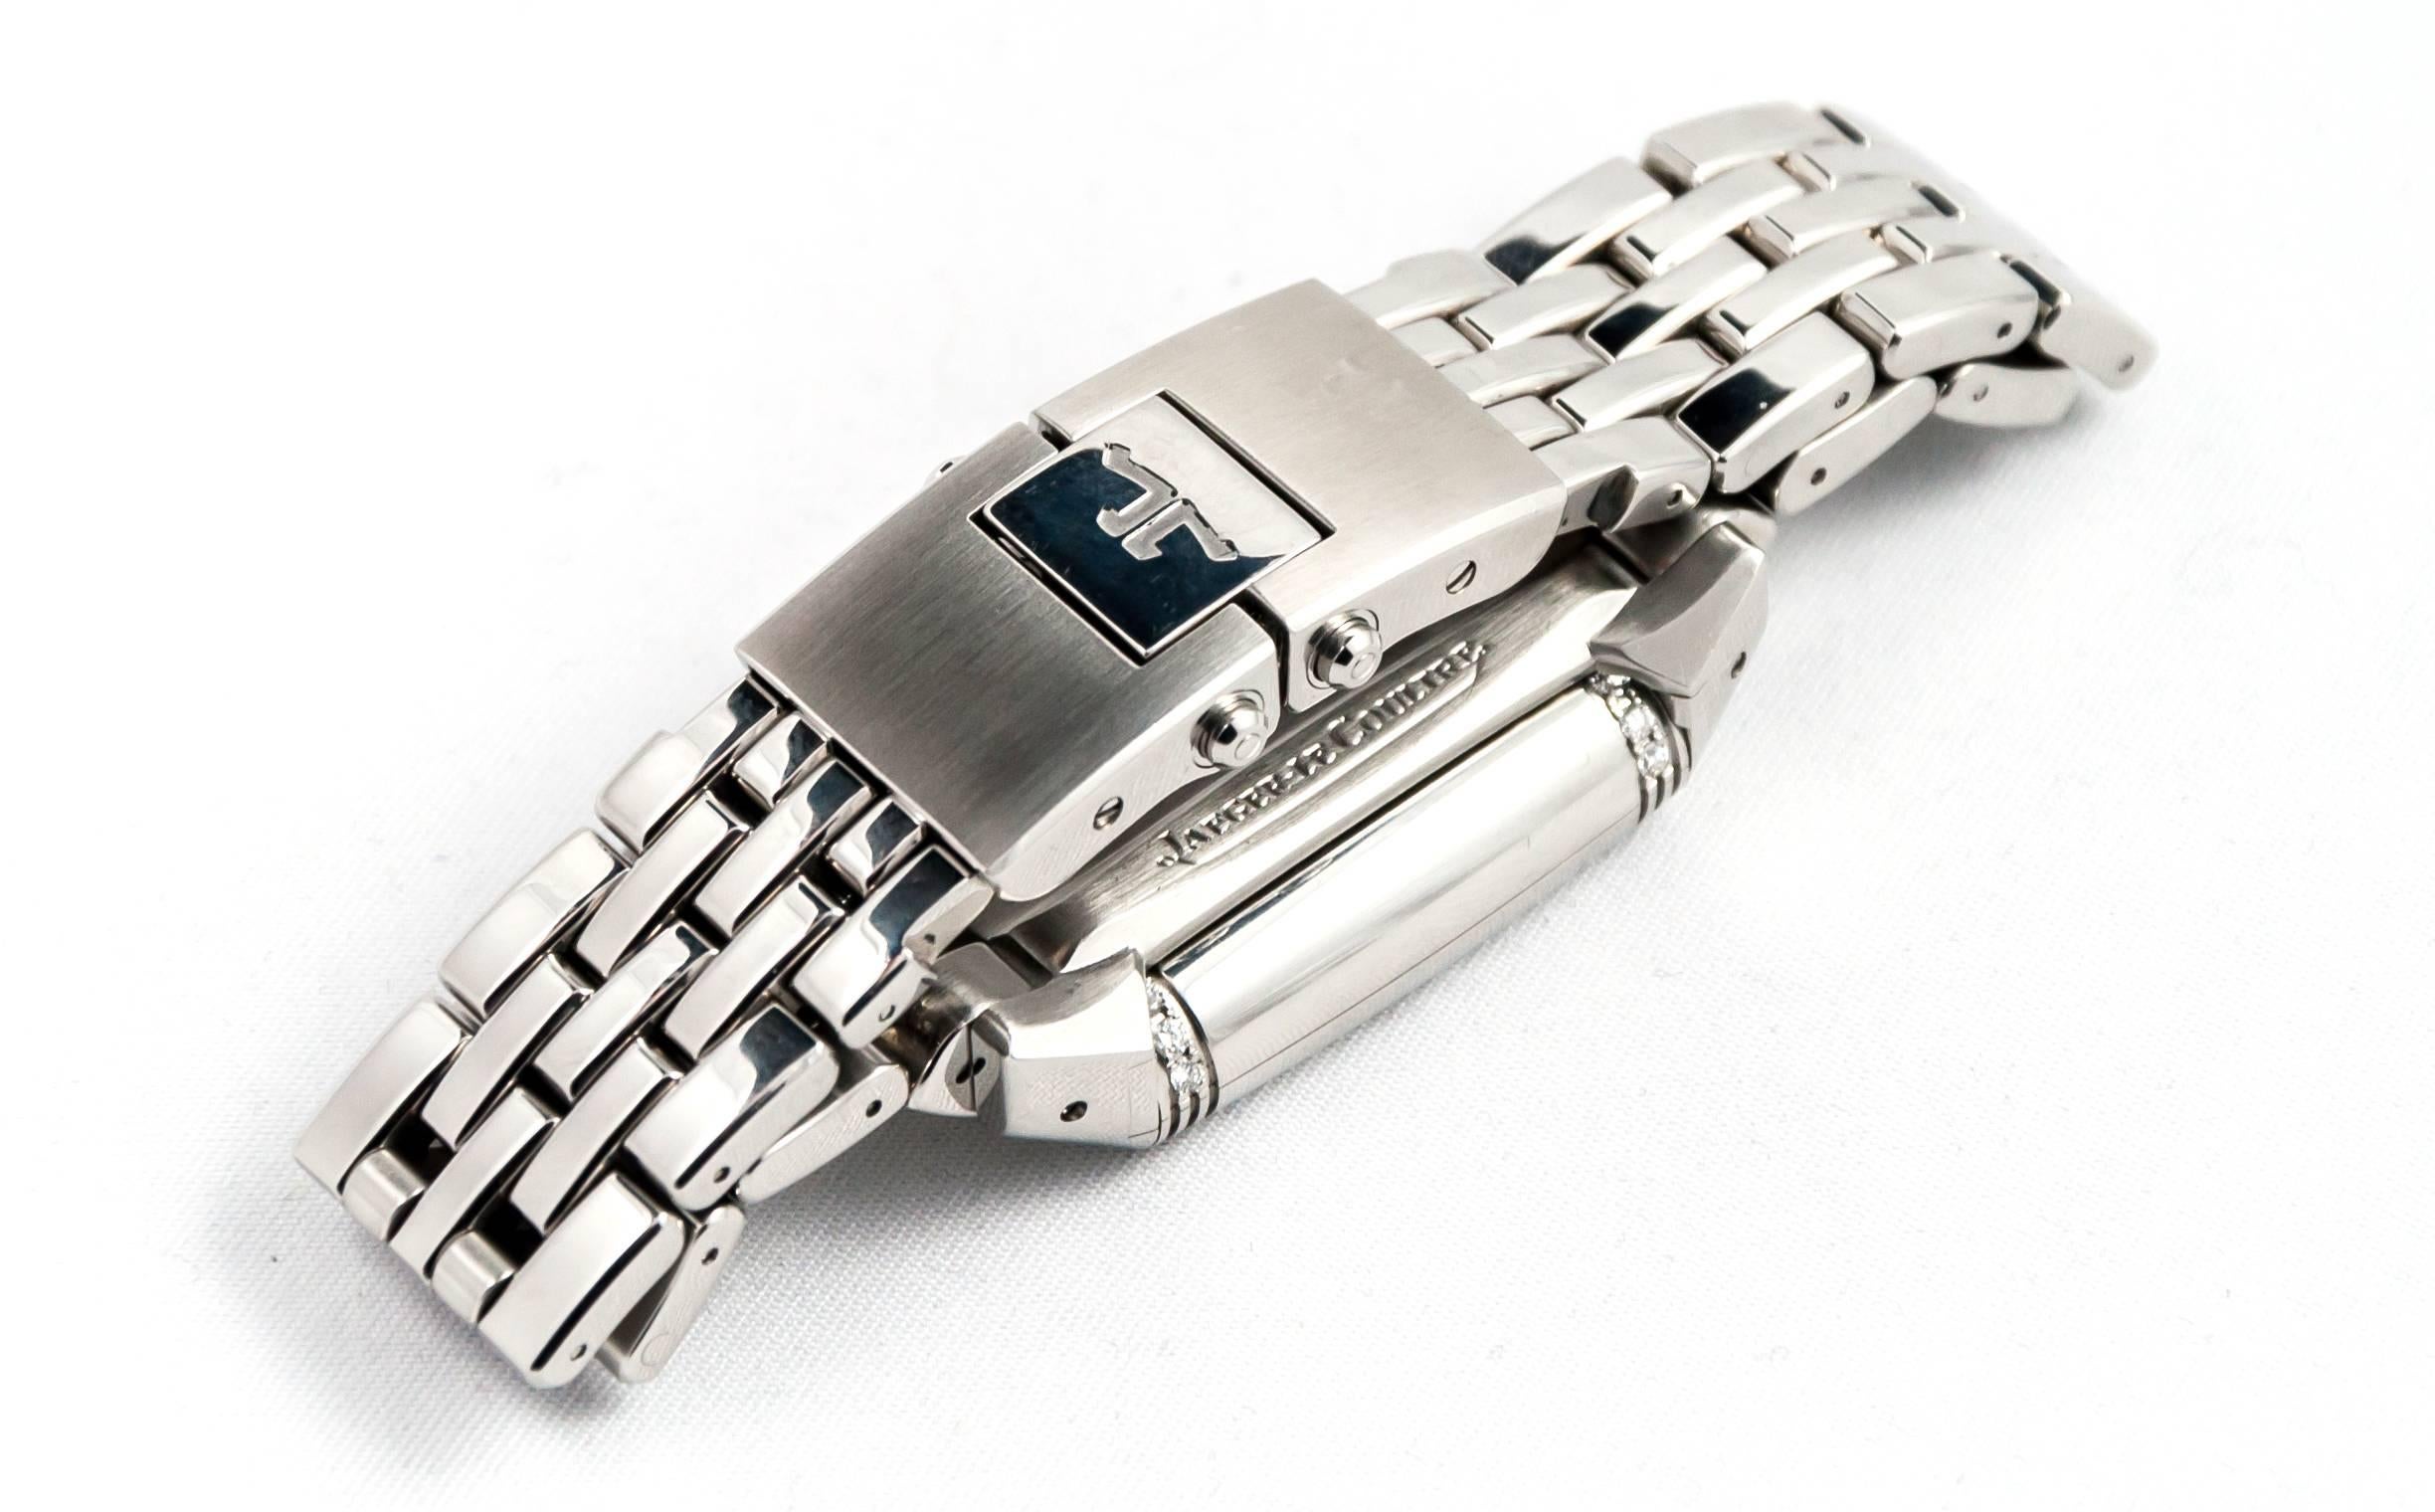 JAEGER LECOULTRE
Watch Reverso Lady Duoface.
Steel / Steel bracelet.
One face bezel diamonds dial silver. Moon phase.
One silvered dial face. Power reserve. Seconds at 6H.
Mechanical movement.
Warranty 1 year.